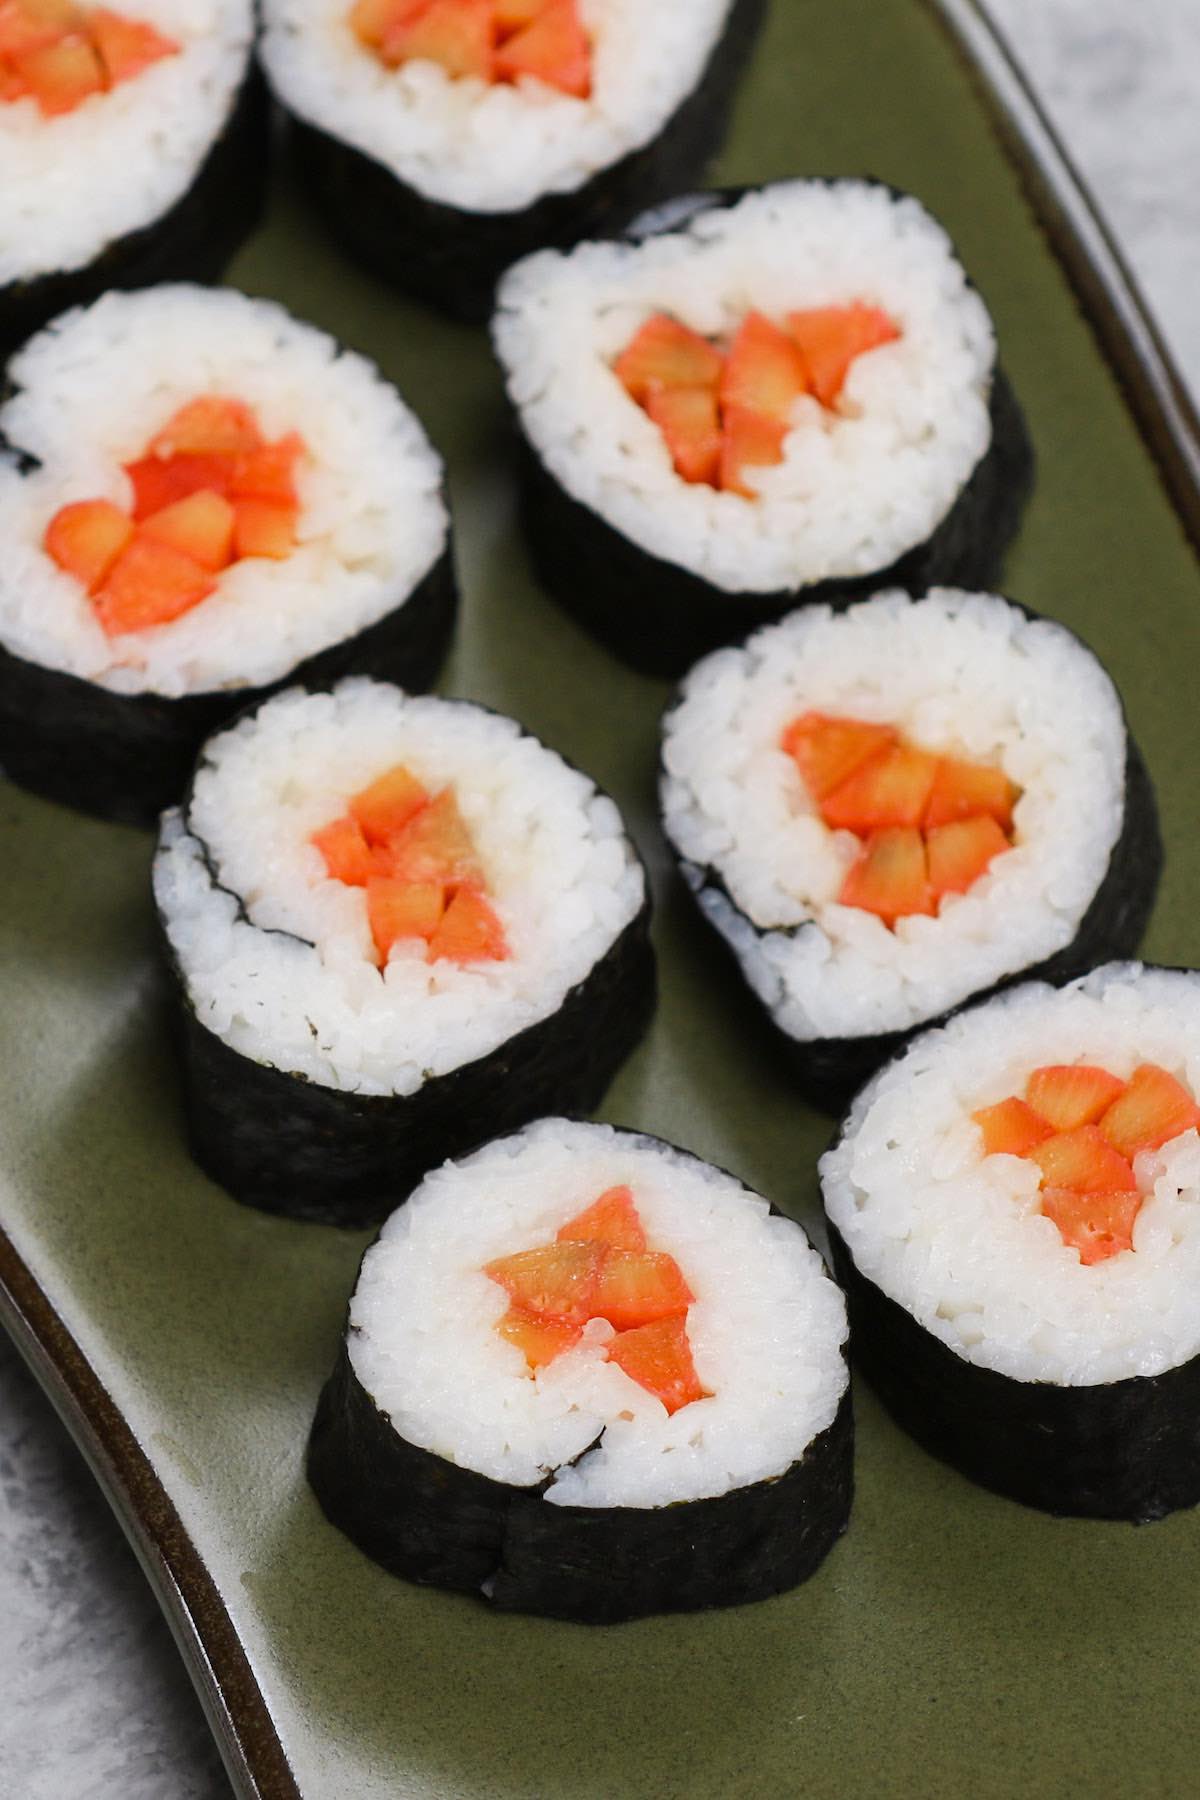 How to make gobo sushi